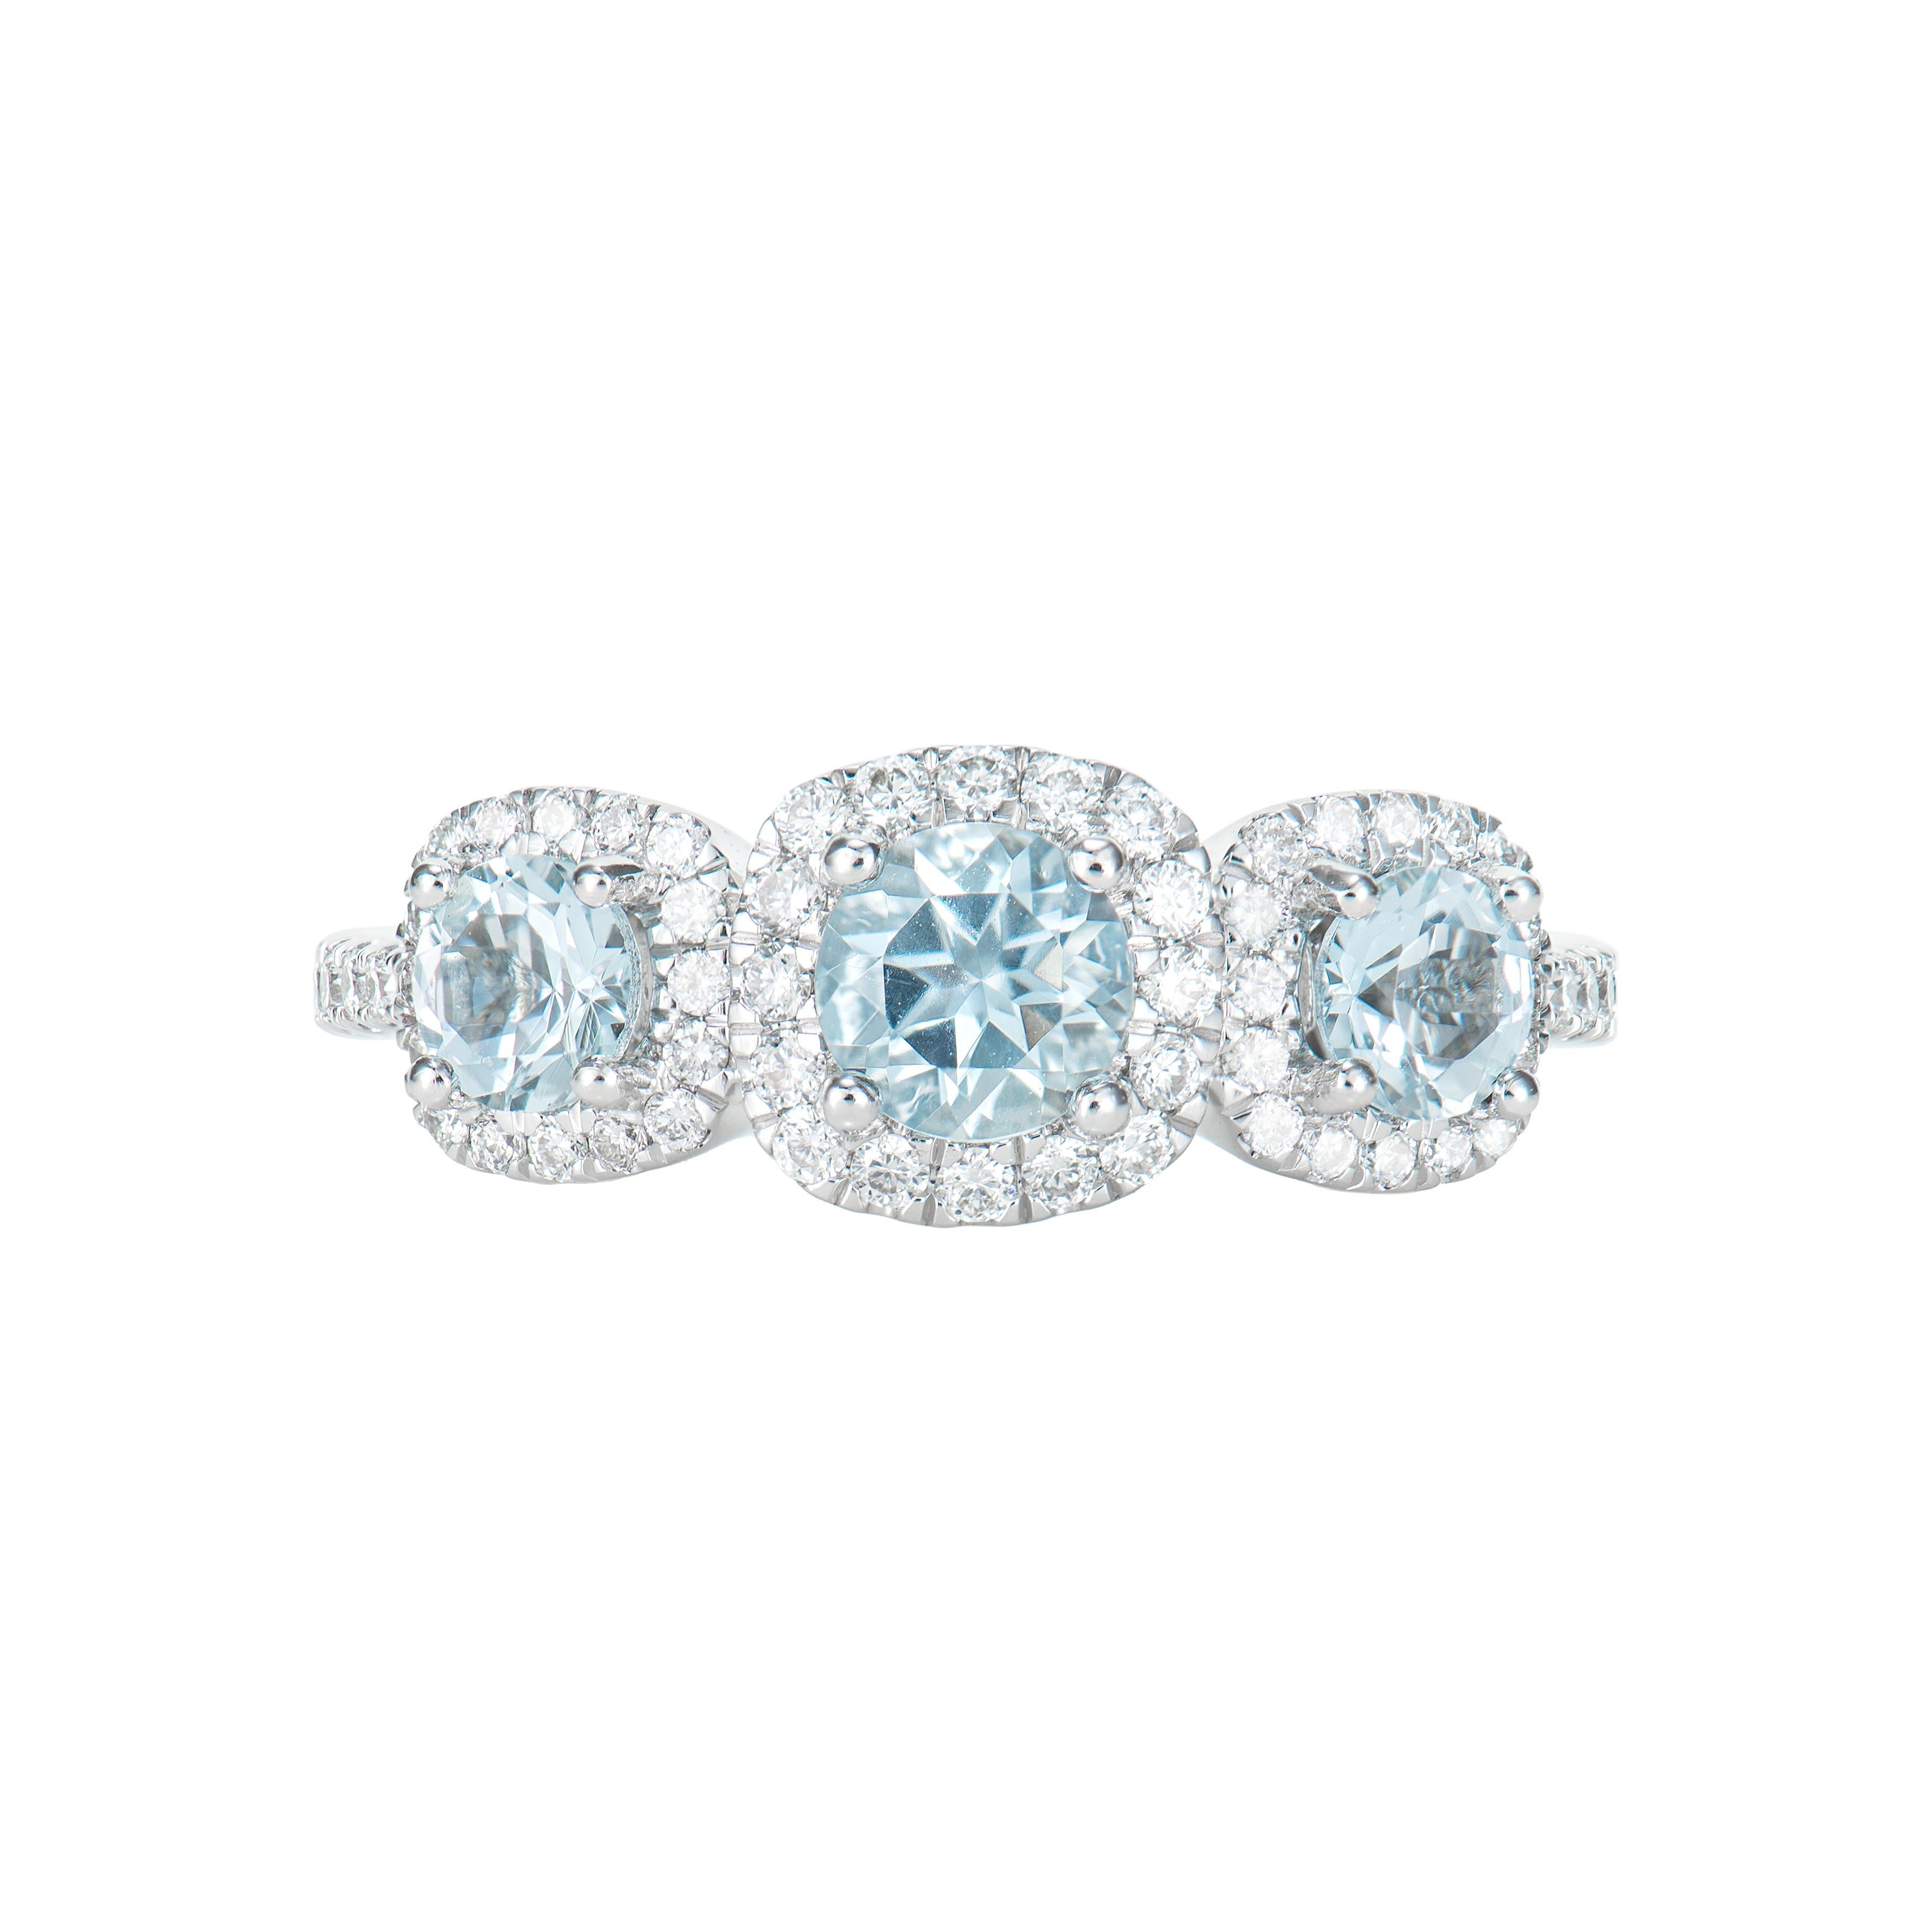 Contemporary 0.89 Carat Three Stone Aquamarine Solitaire Ring in 14KWG with White Diamond. For Sale